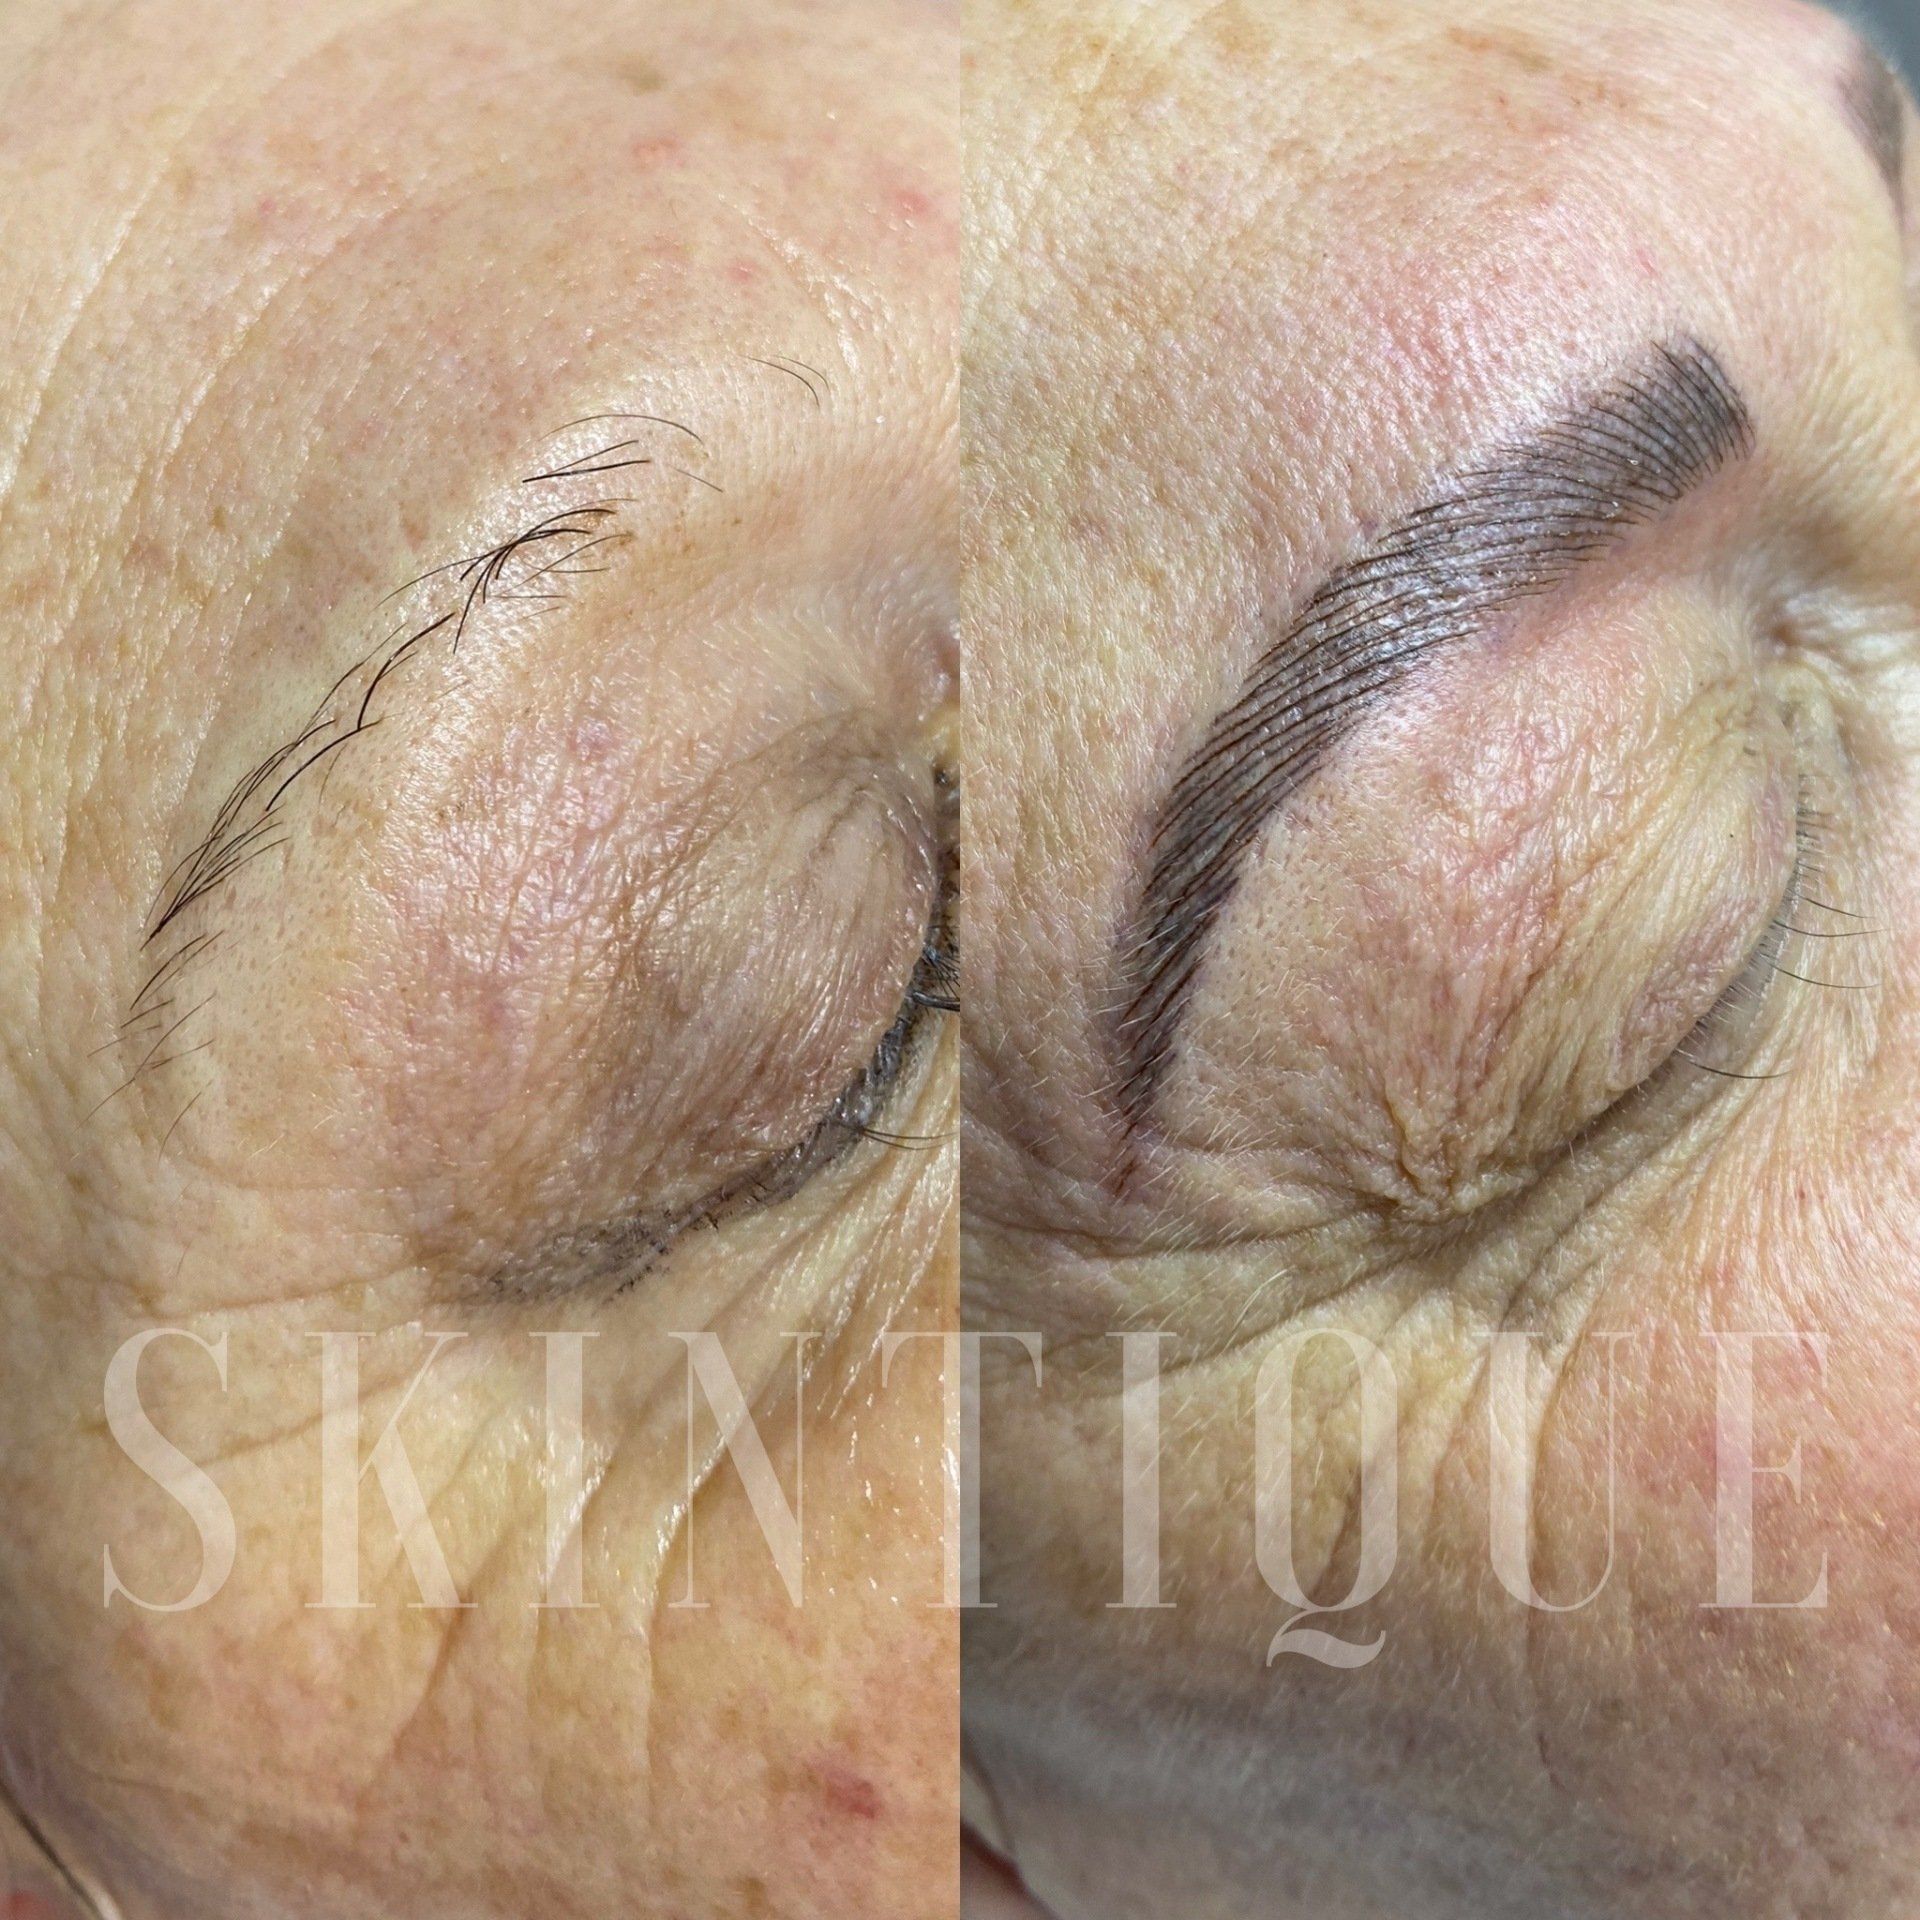 Skintique cosmetic eyebrow tattooing before and after